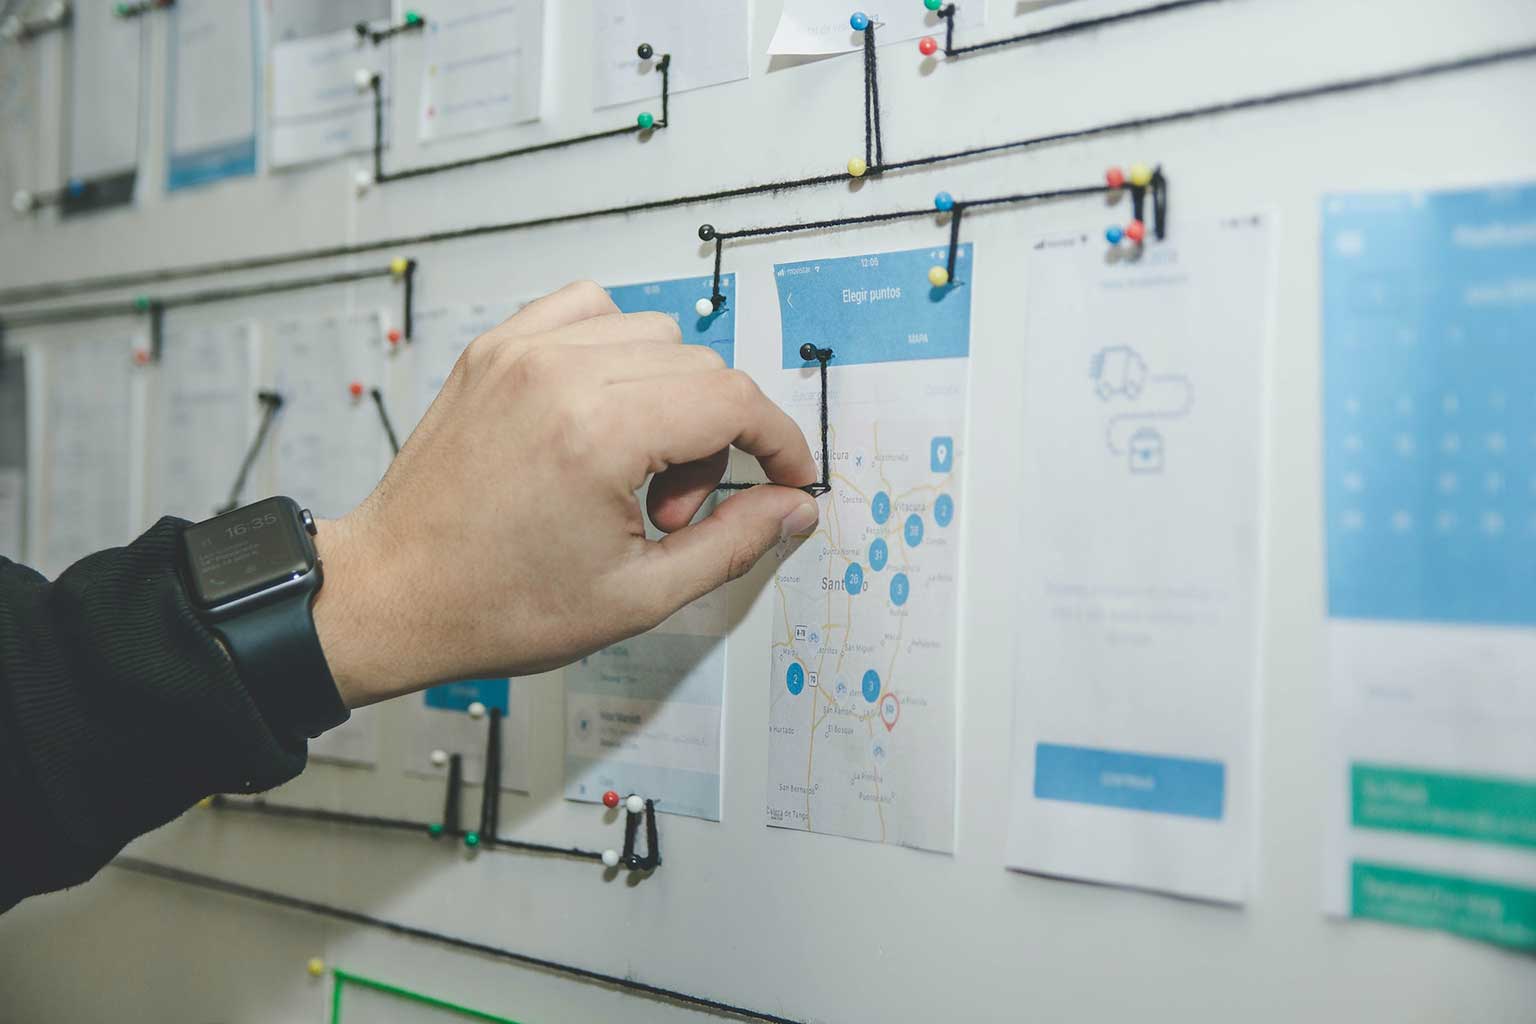 Printouts of a UI journey pinned to a wall and connected with strings, Photo by Alvaro Reyes on Unsplash